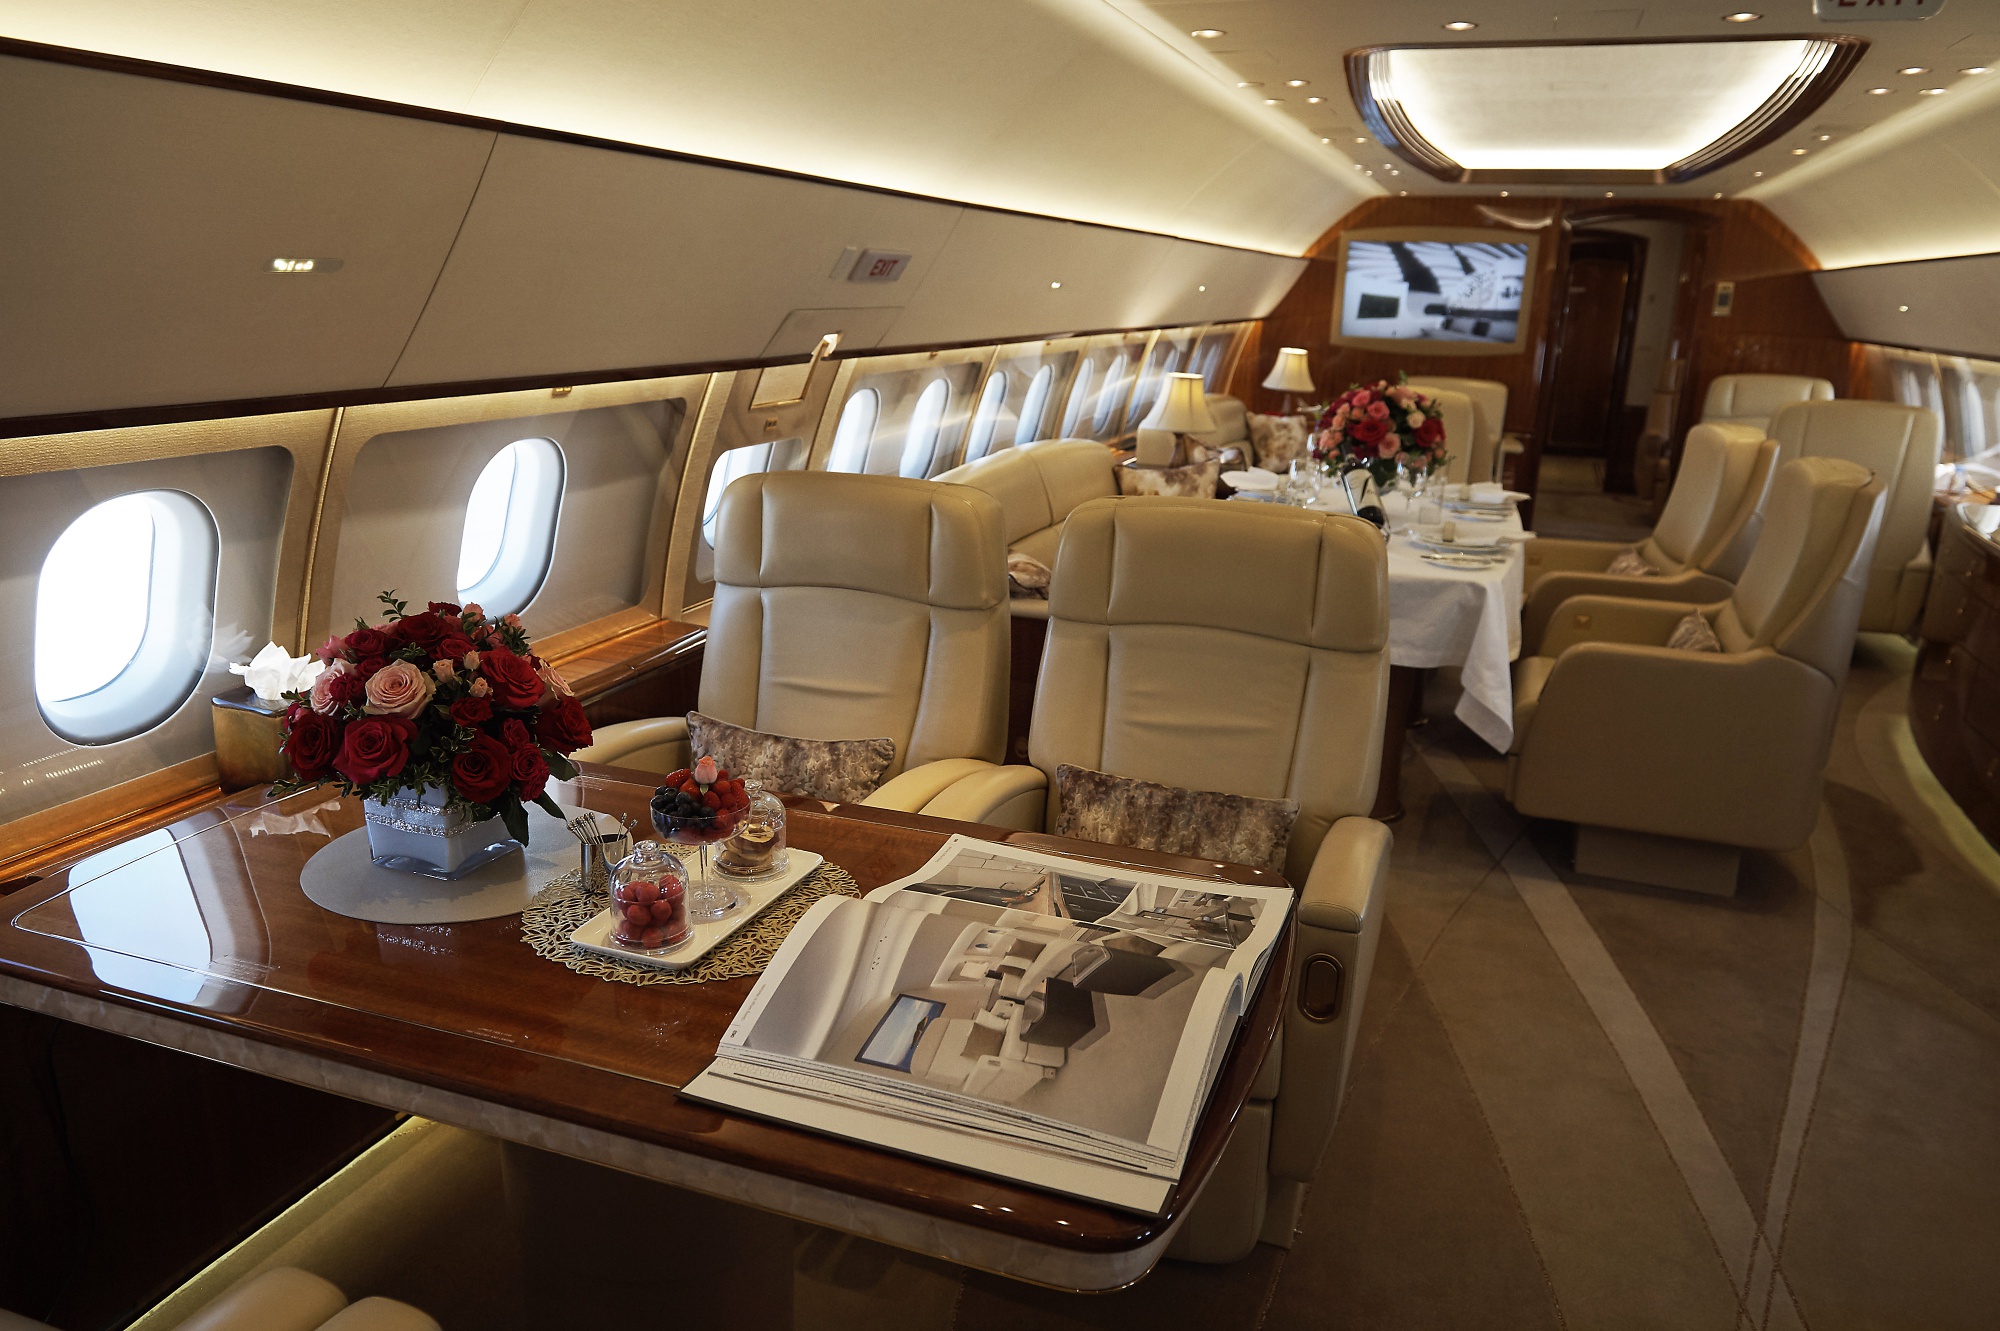 Climate change: What should we do about private jets?, Society